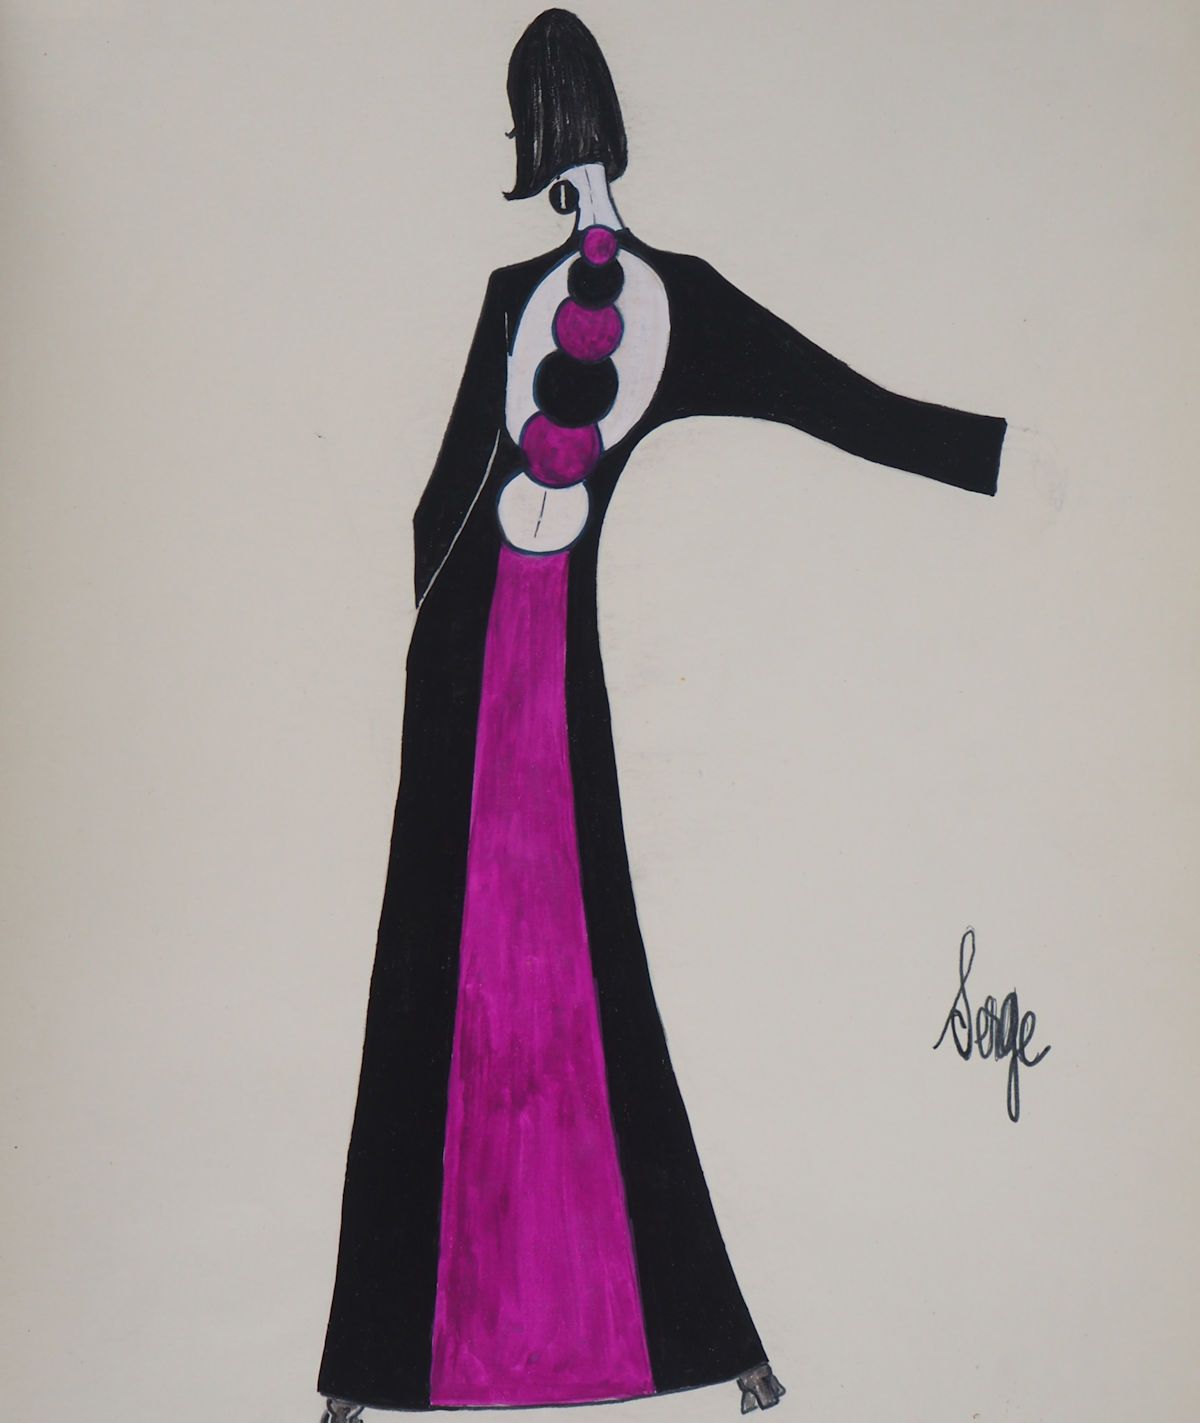 Serge PONS Serge PONS

Evening dress

Original ink and watercolor

Signed by the&hellip;